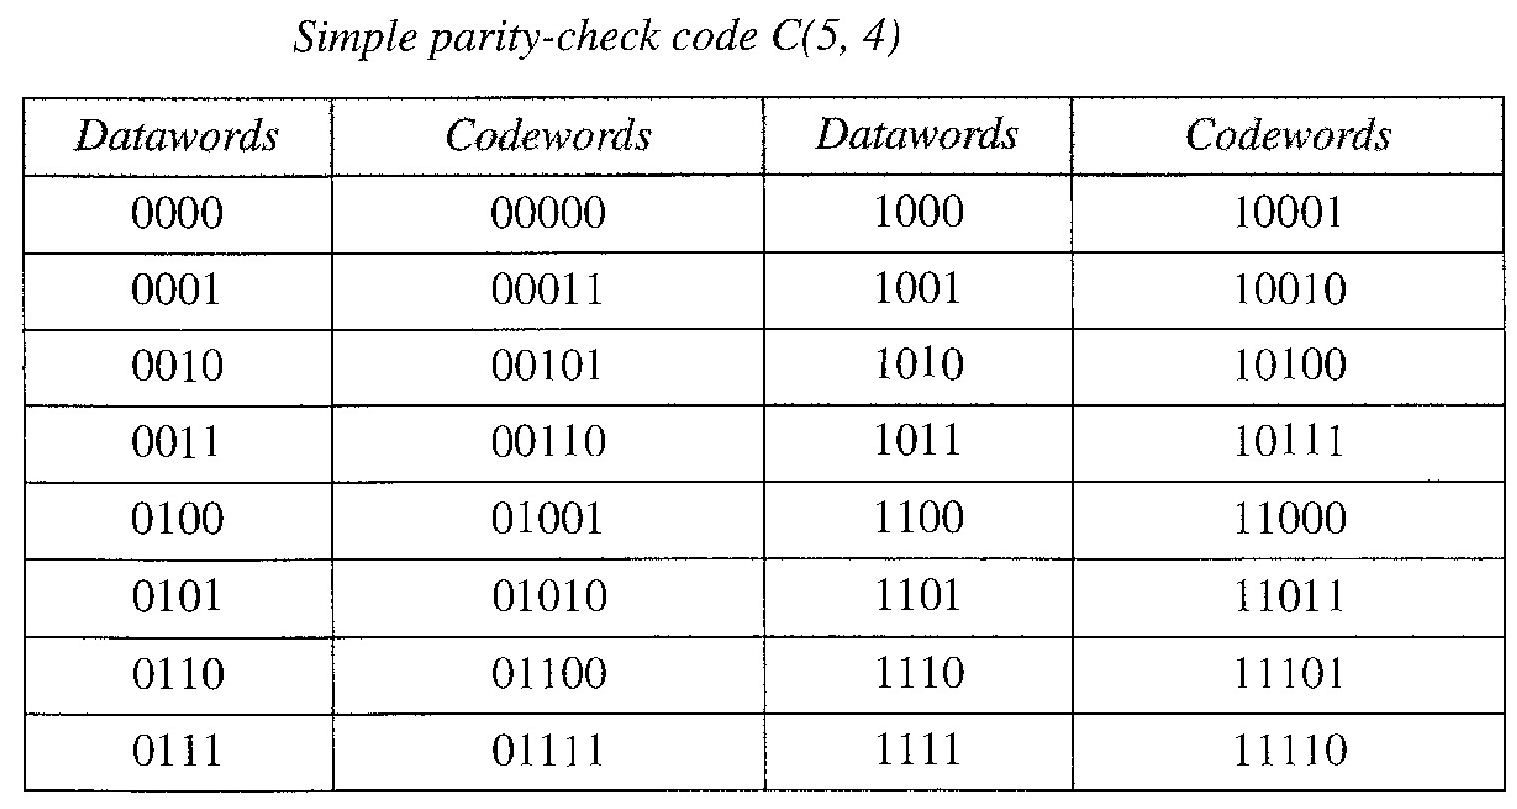 Simple Parity-Check Code